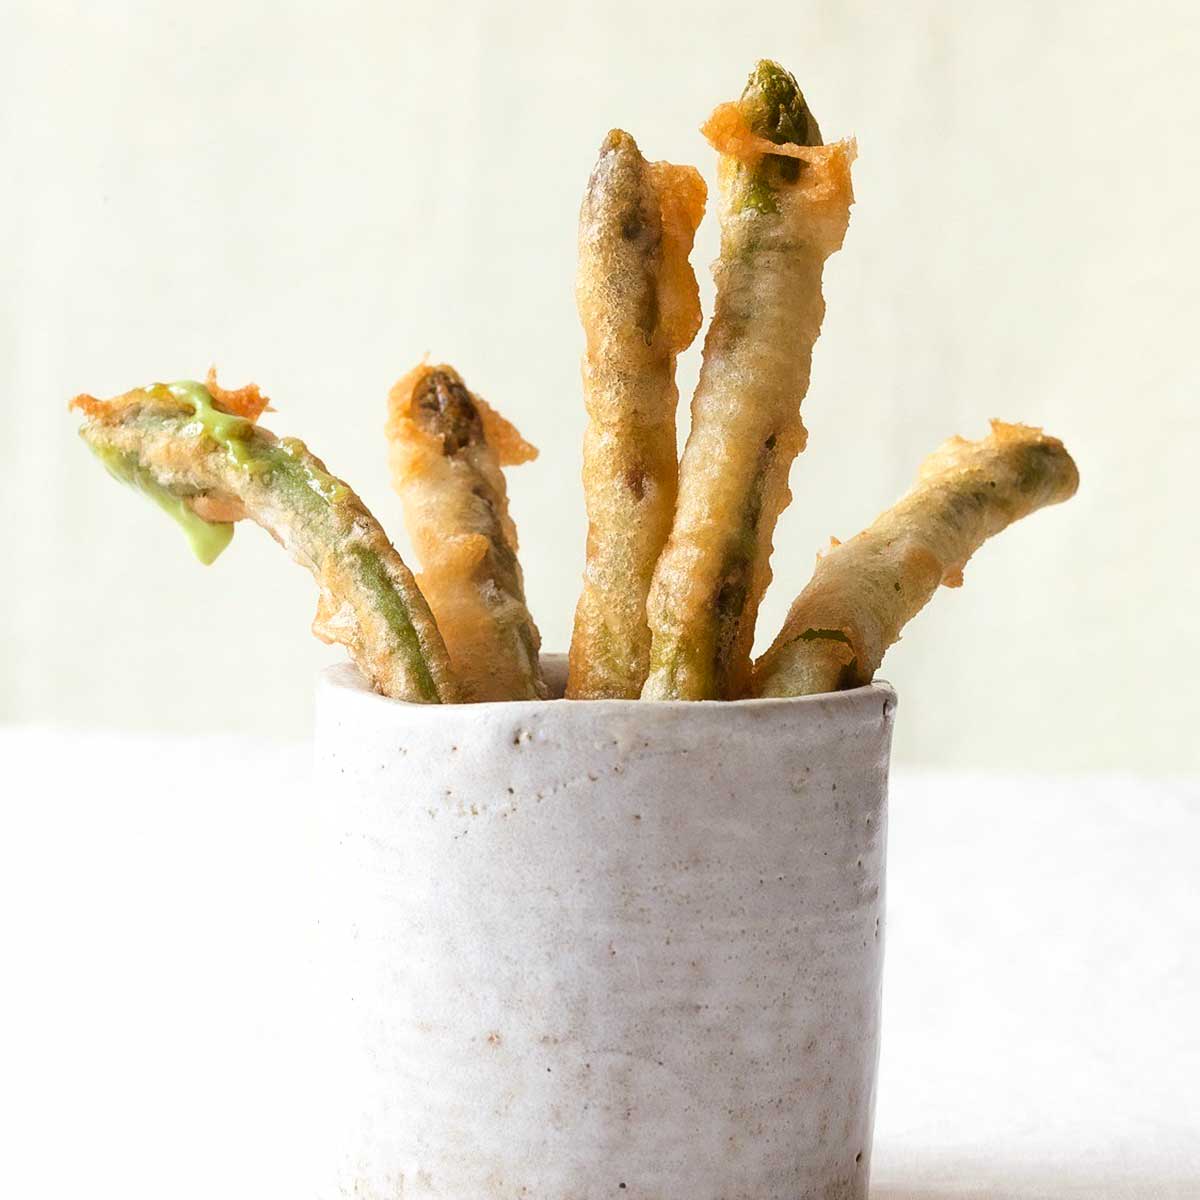 Five Portuguese deep-fried green beans standing in a white cup.